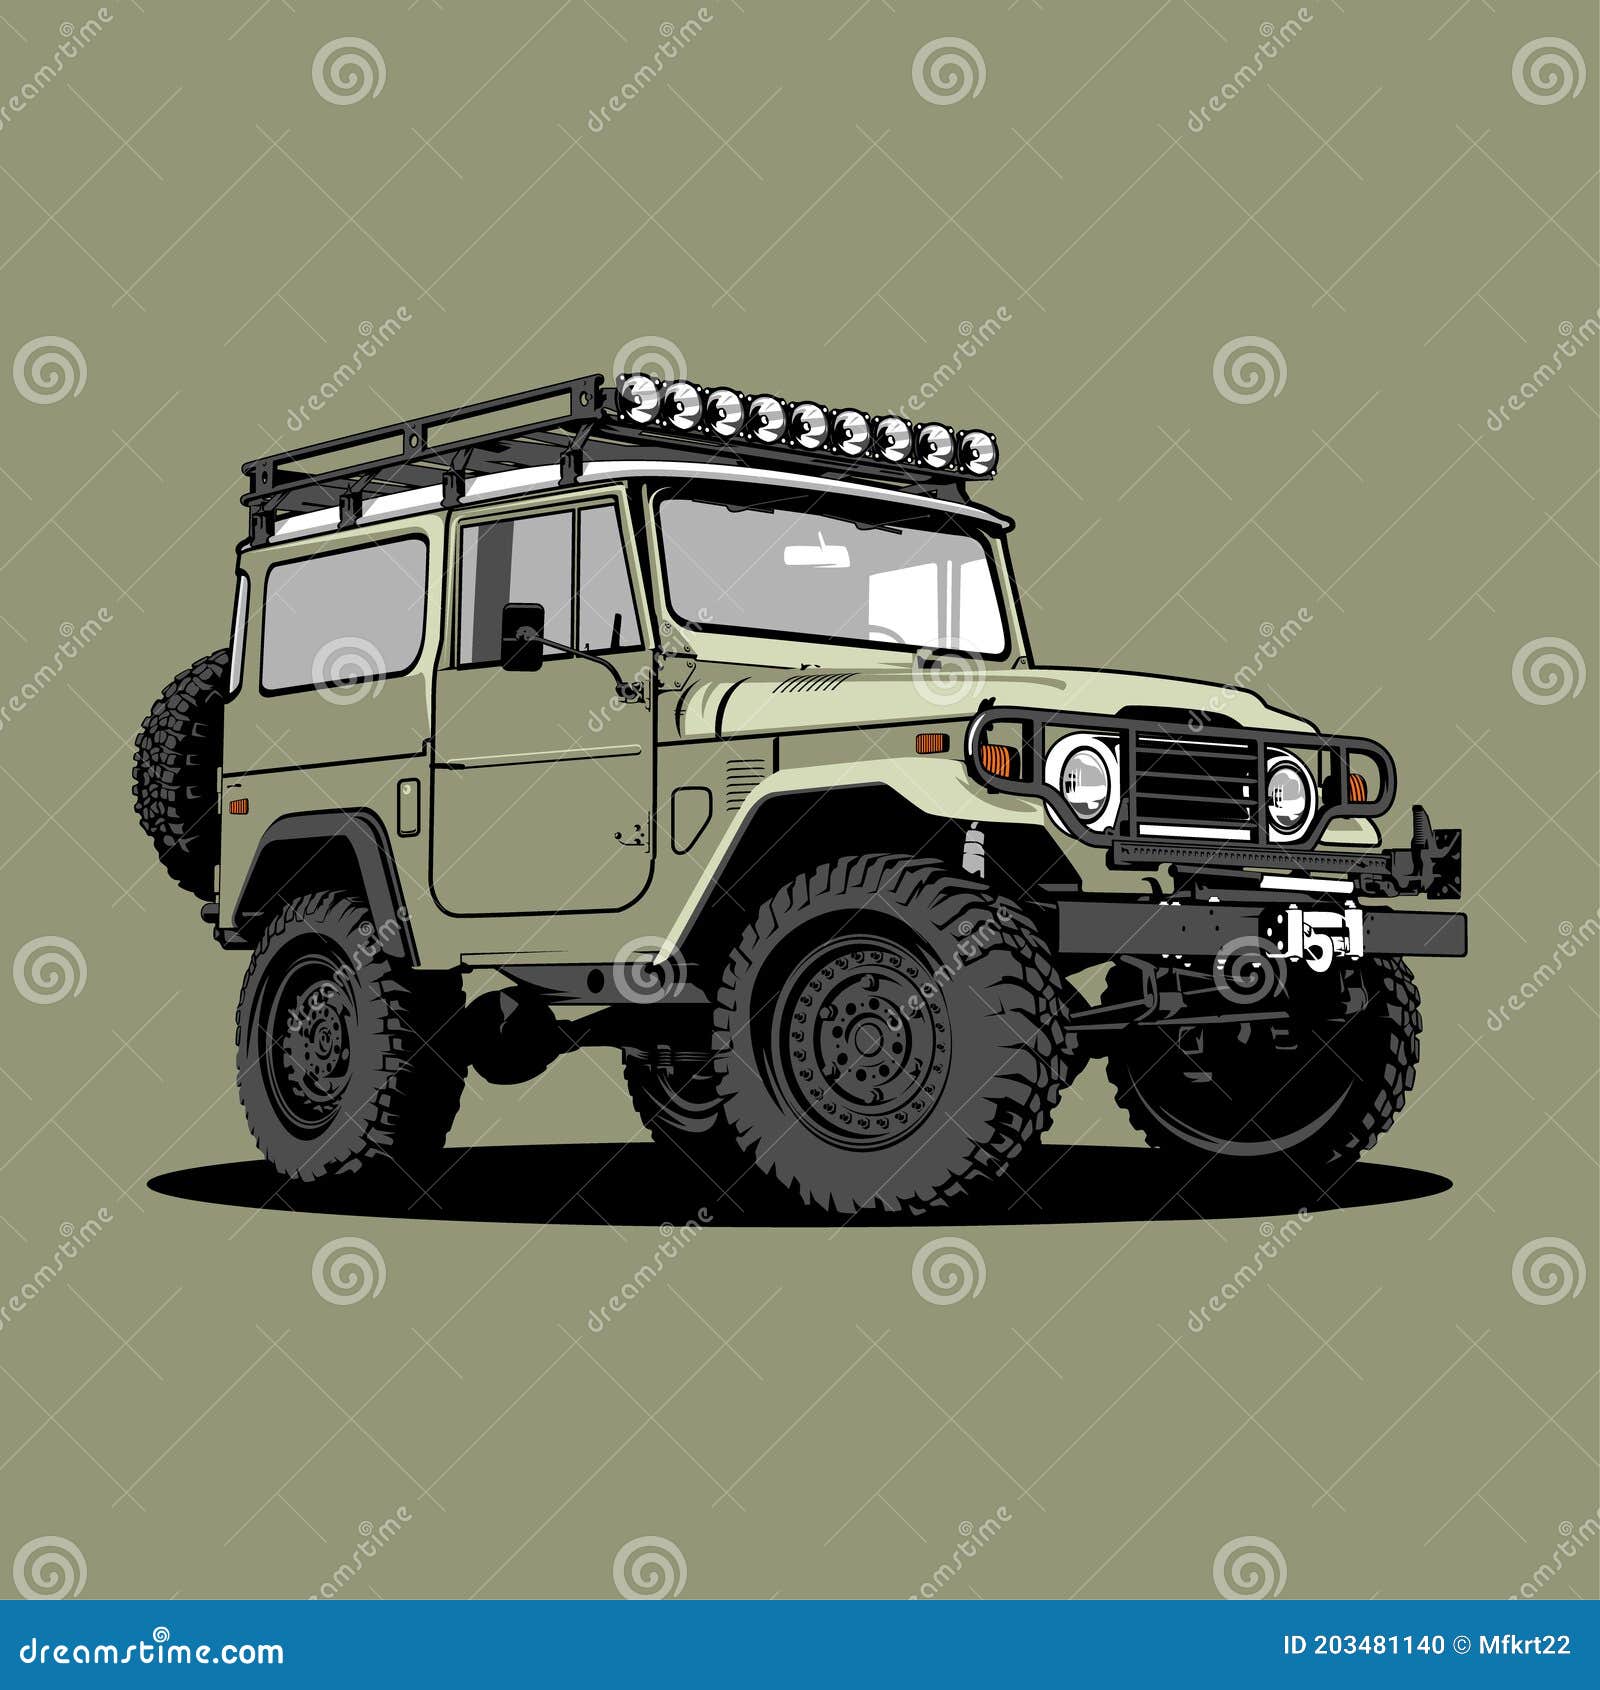 Share 101+ about toyota land cruiser jeep super cool - in.daotaonec